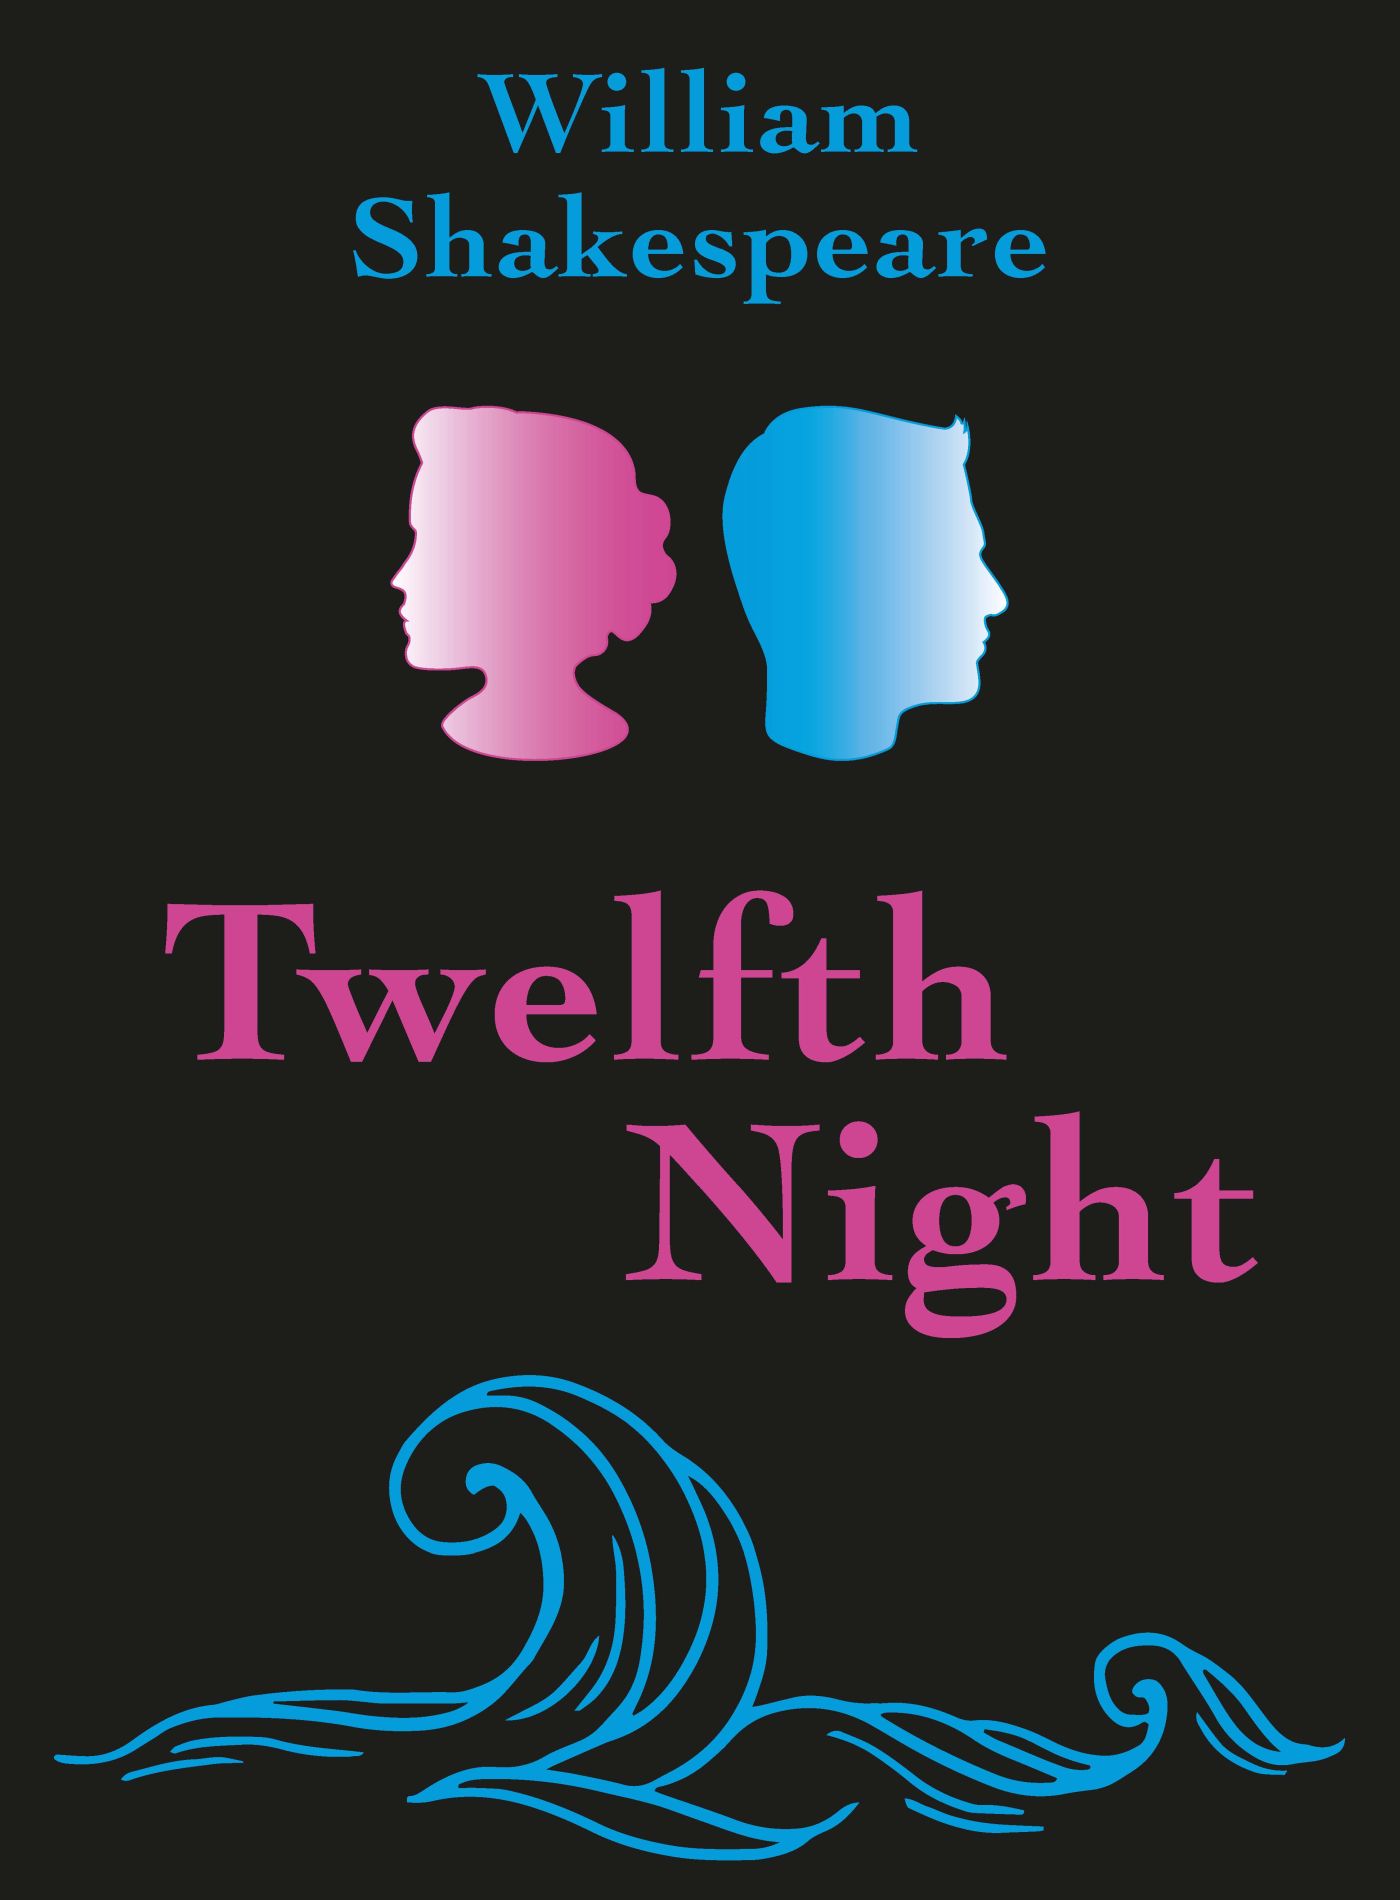 Cover of Twelfth Night portraying a pink female headshape and a blue male headshape in profile on a black background